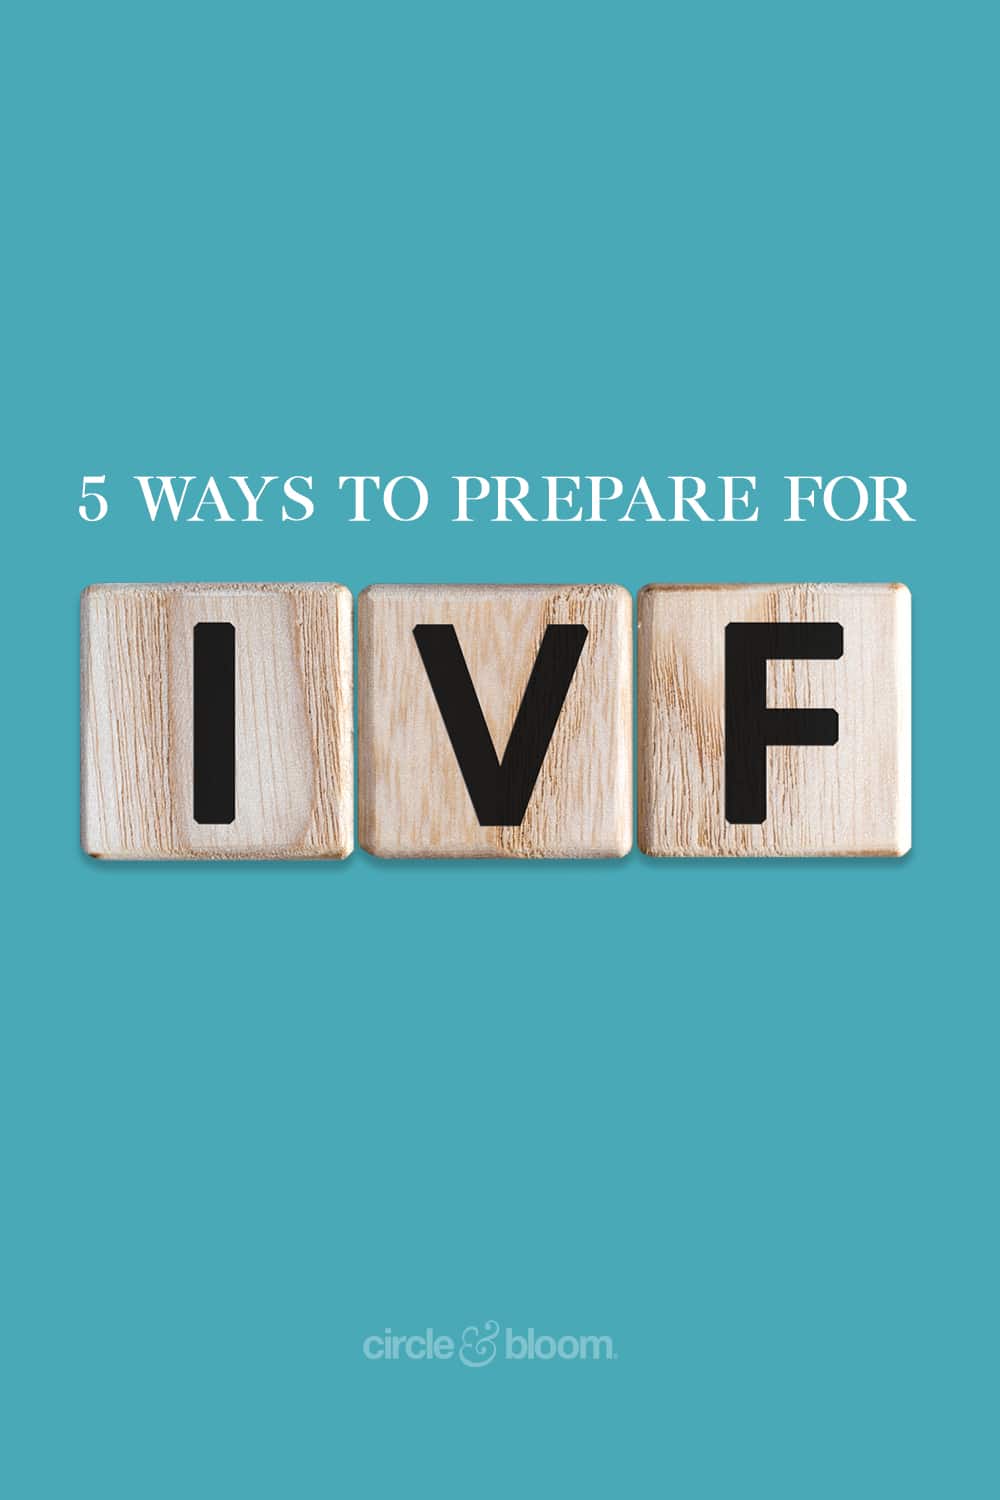 5 Ways to Prepare for IVF Treatments